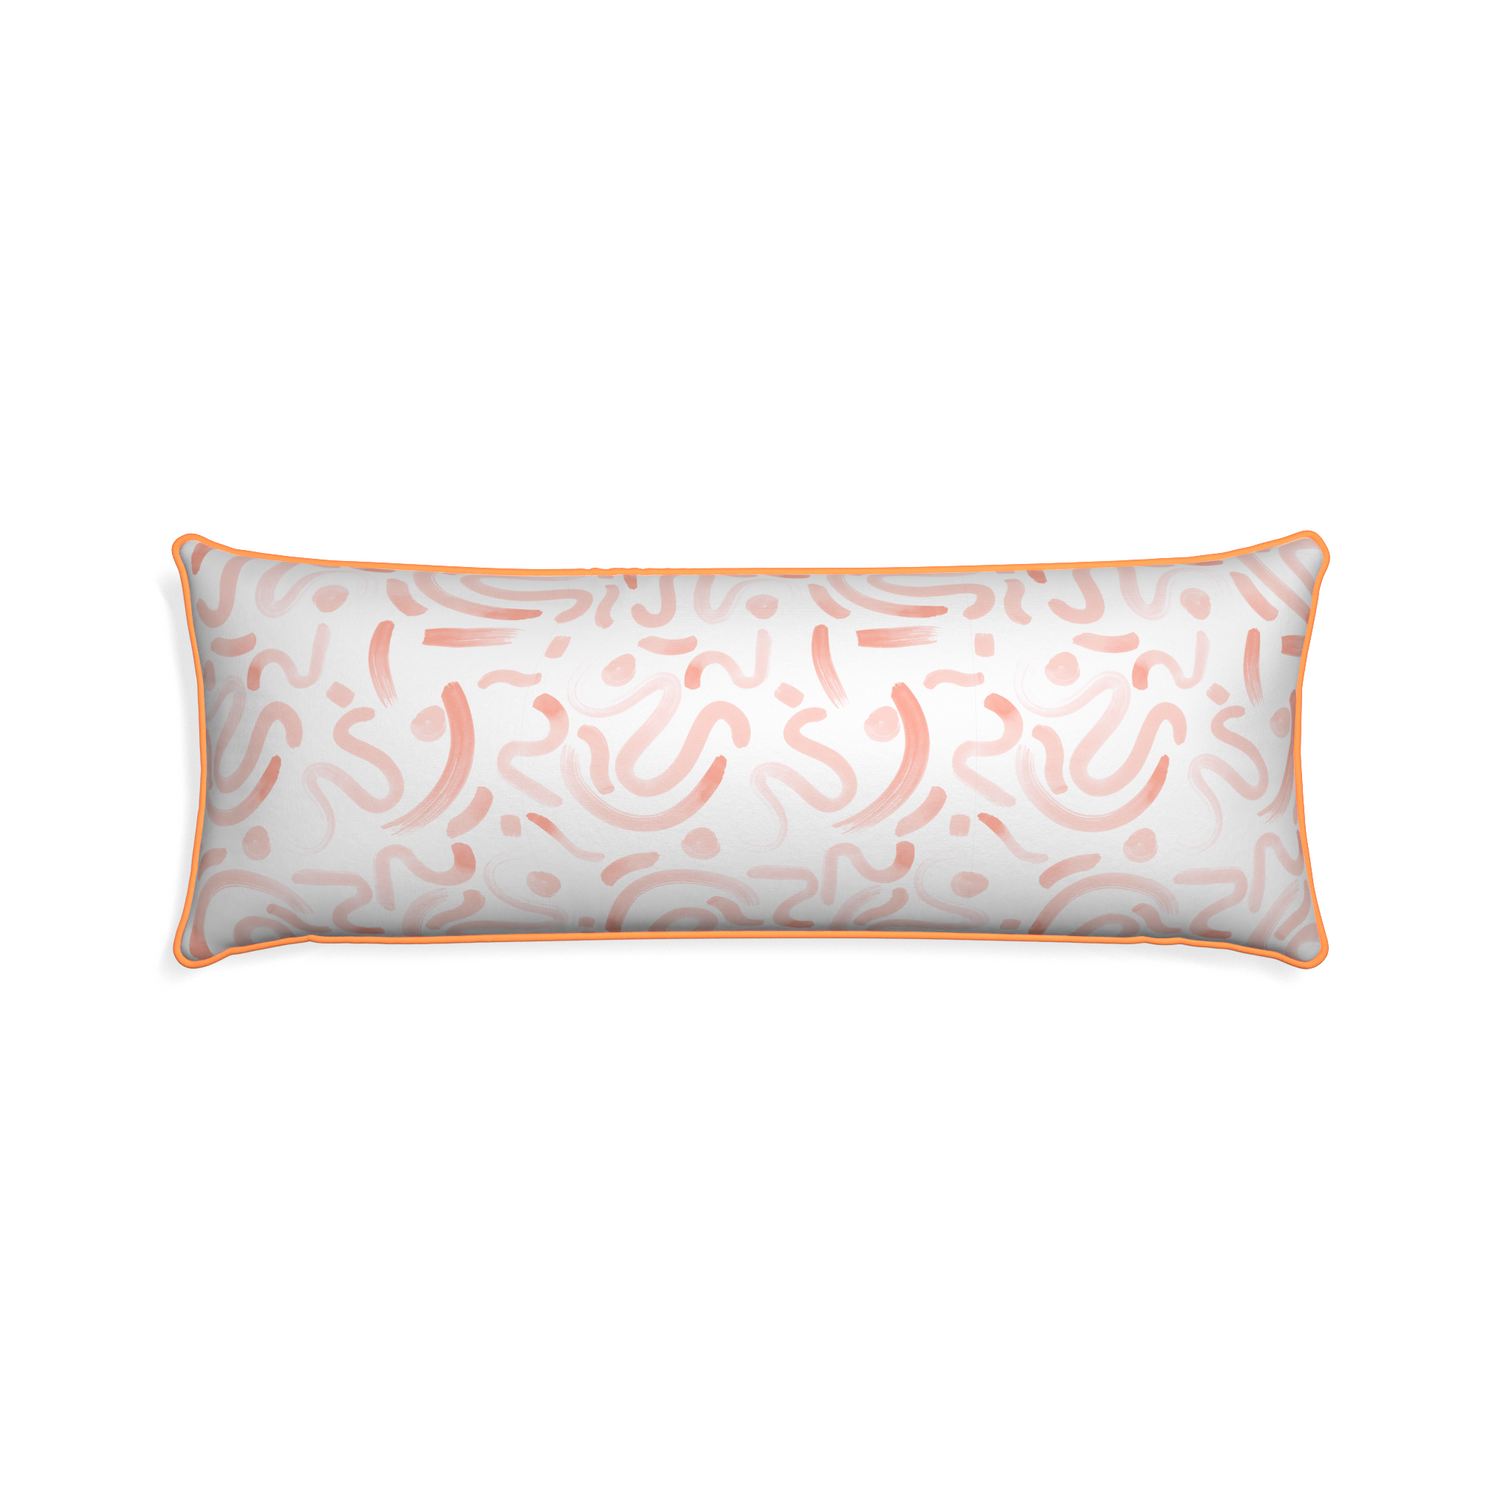 Xl-lumbar hockney pink custom pink graphicpillow with clementine piping on white background